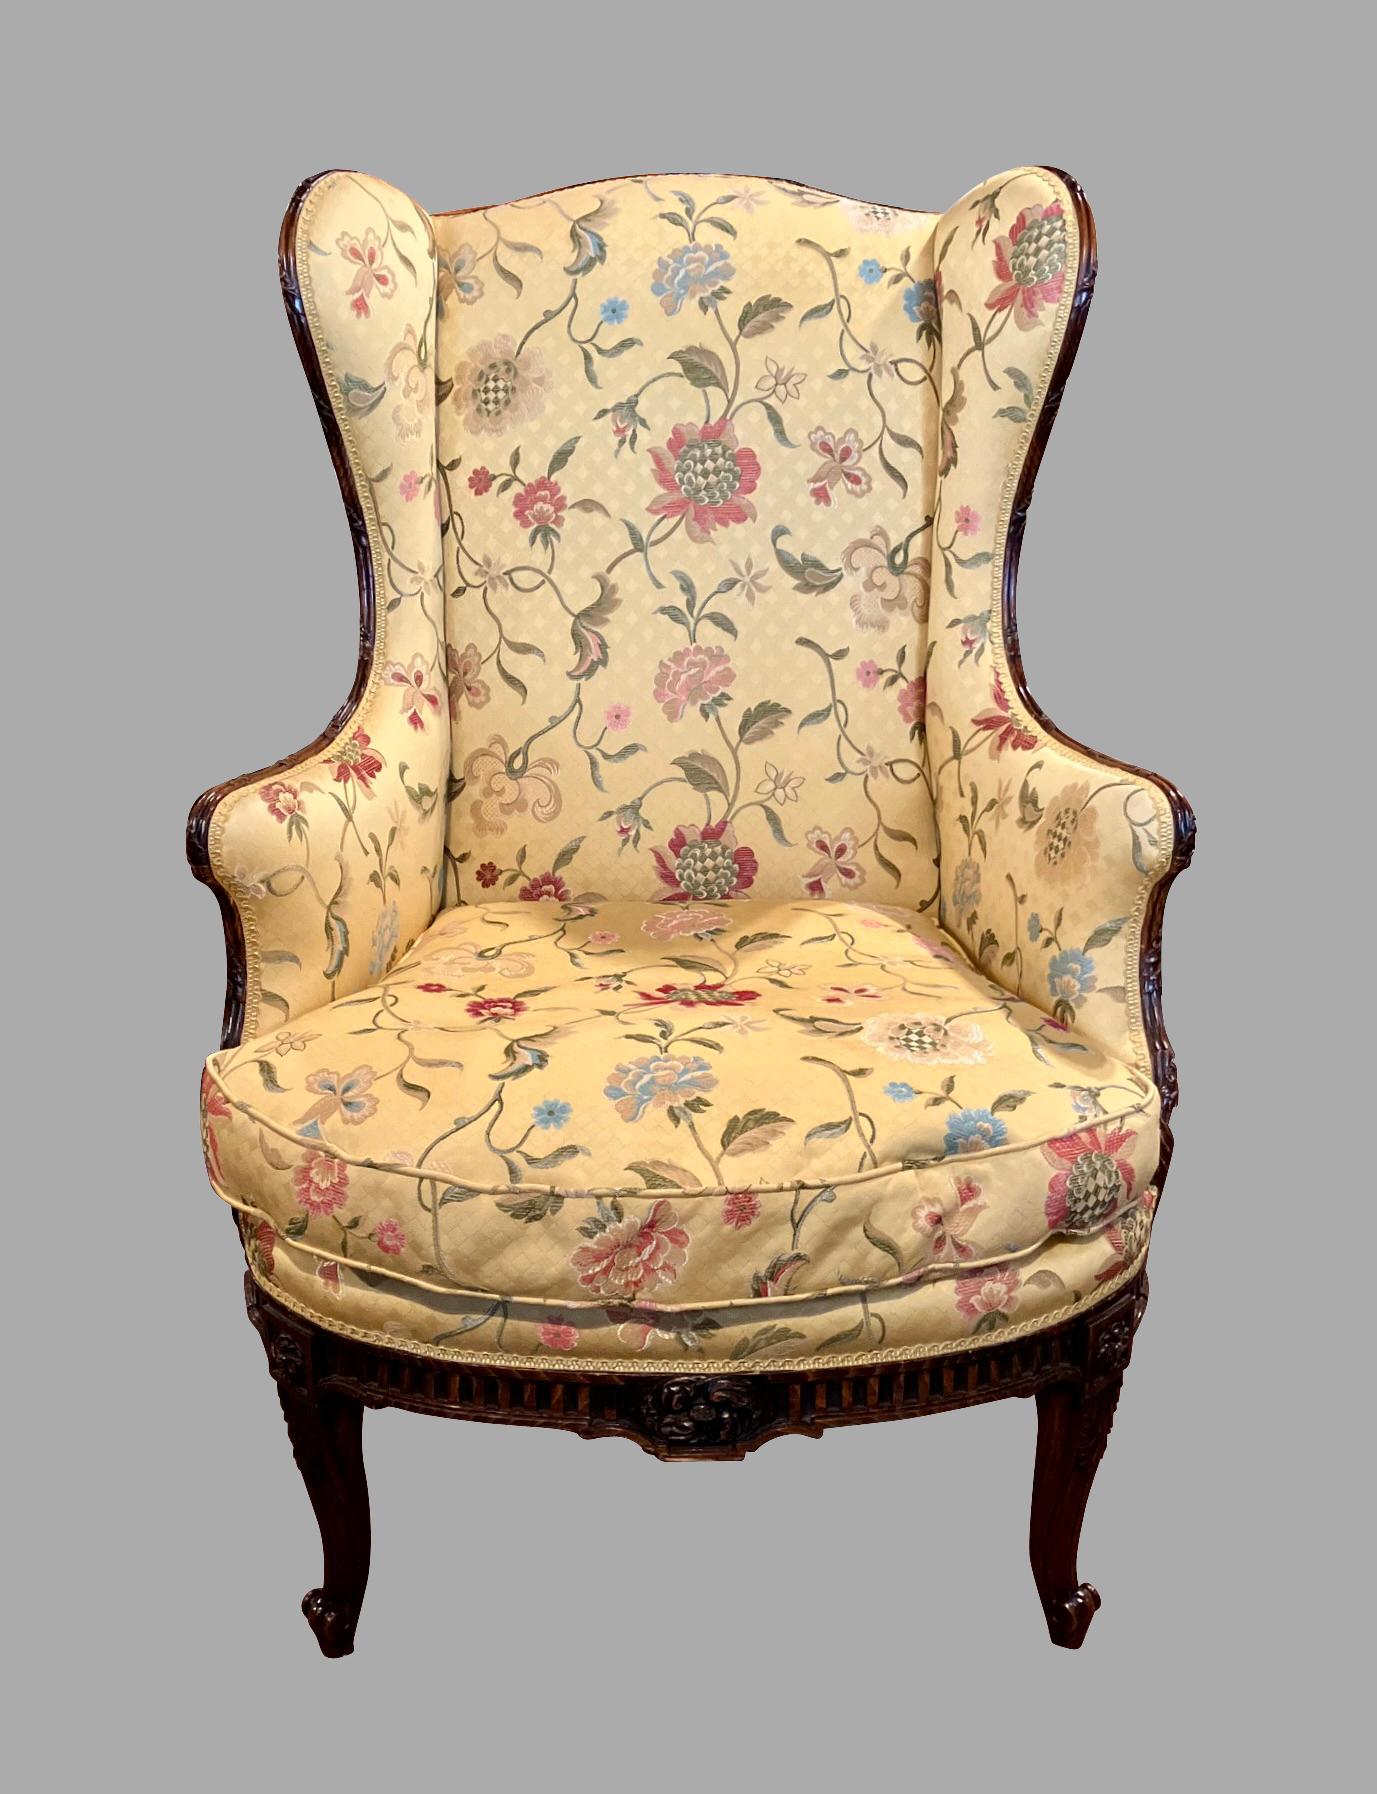 A fine quality Louis XV style lounge chair beautifully upholstered in yellow silk fabric with an overall foliate design. The well-carved hardwood frame starts at the top of the piece and ends in upturned front legs headed with square floral paterae